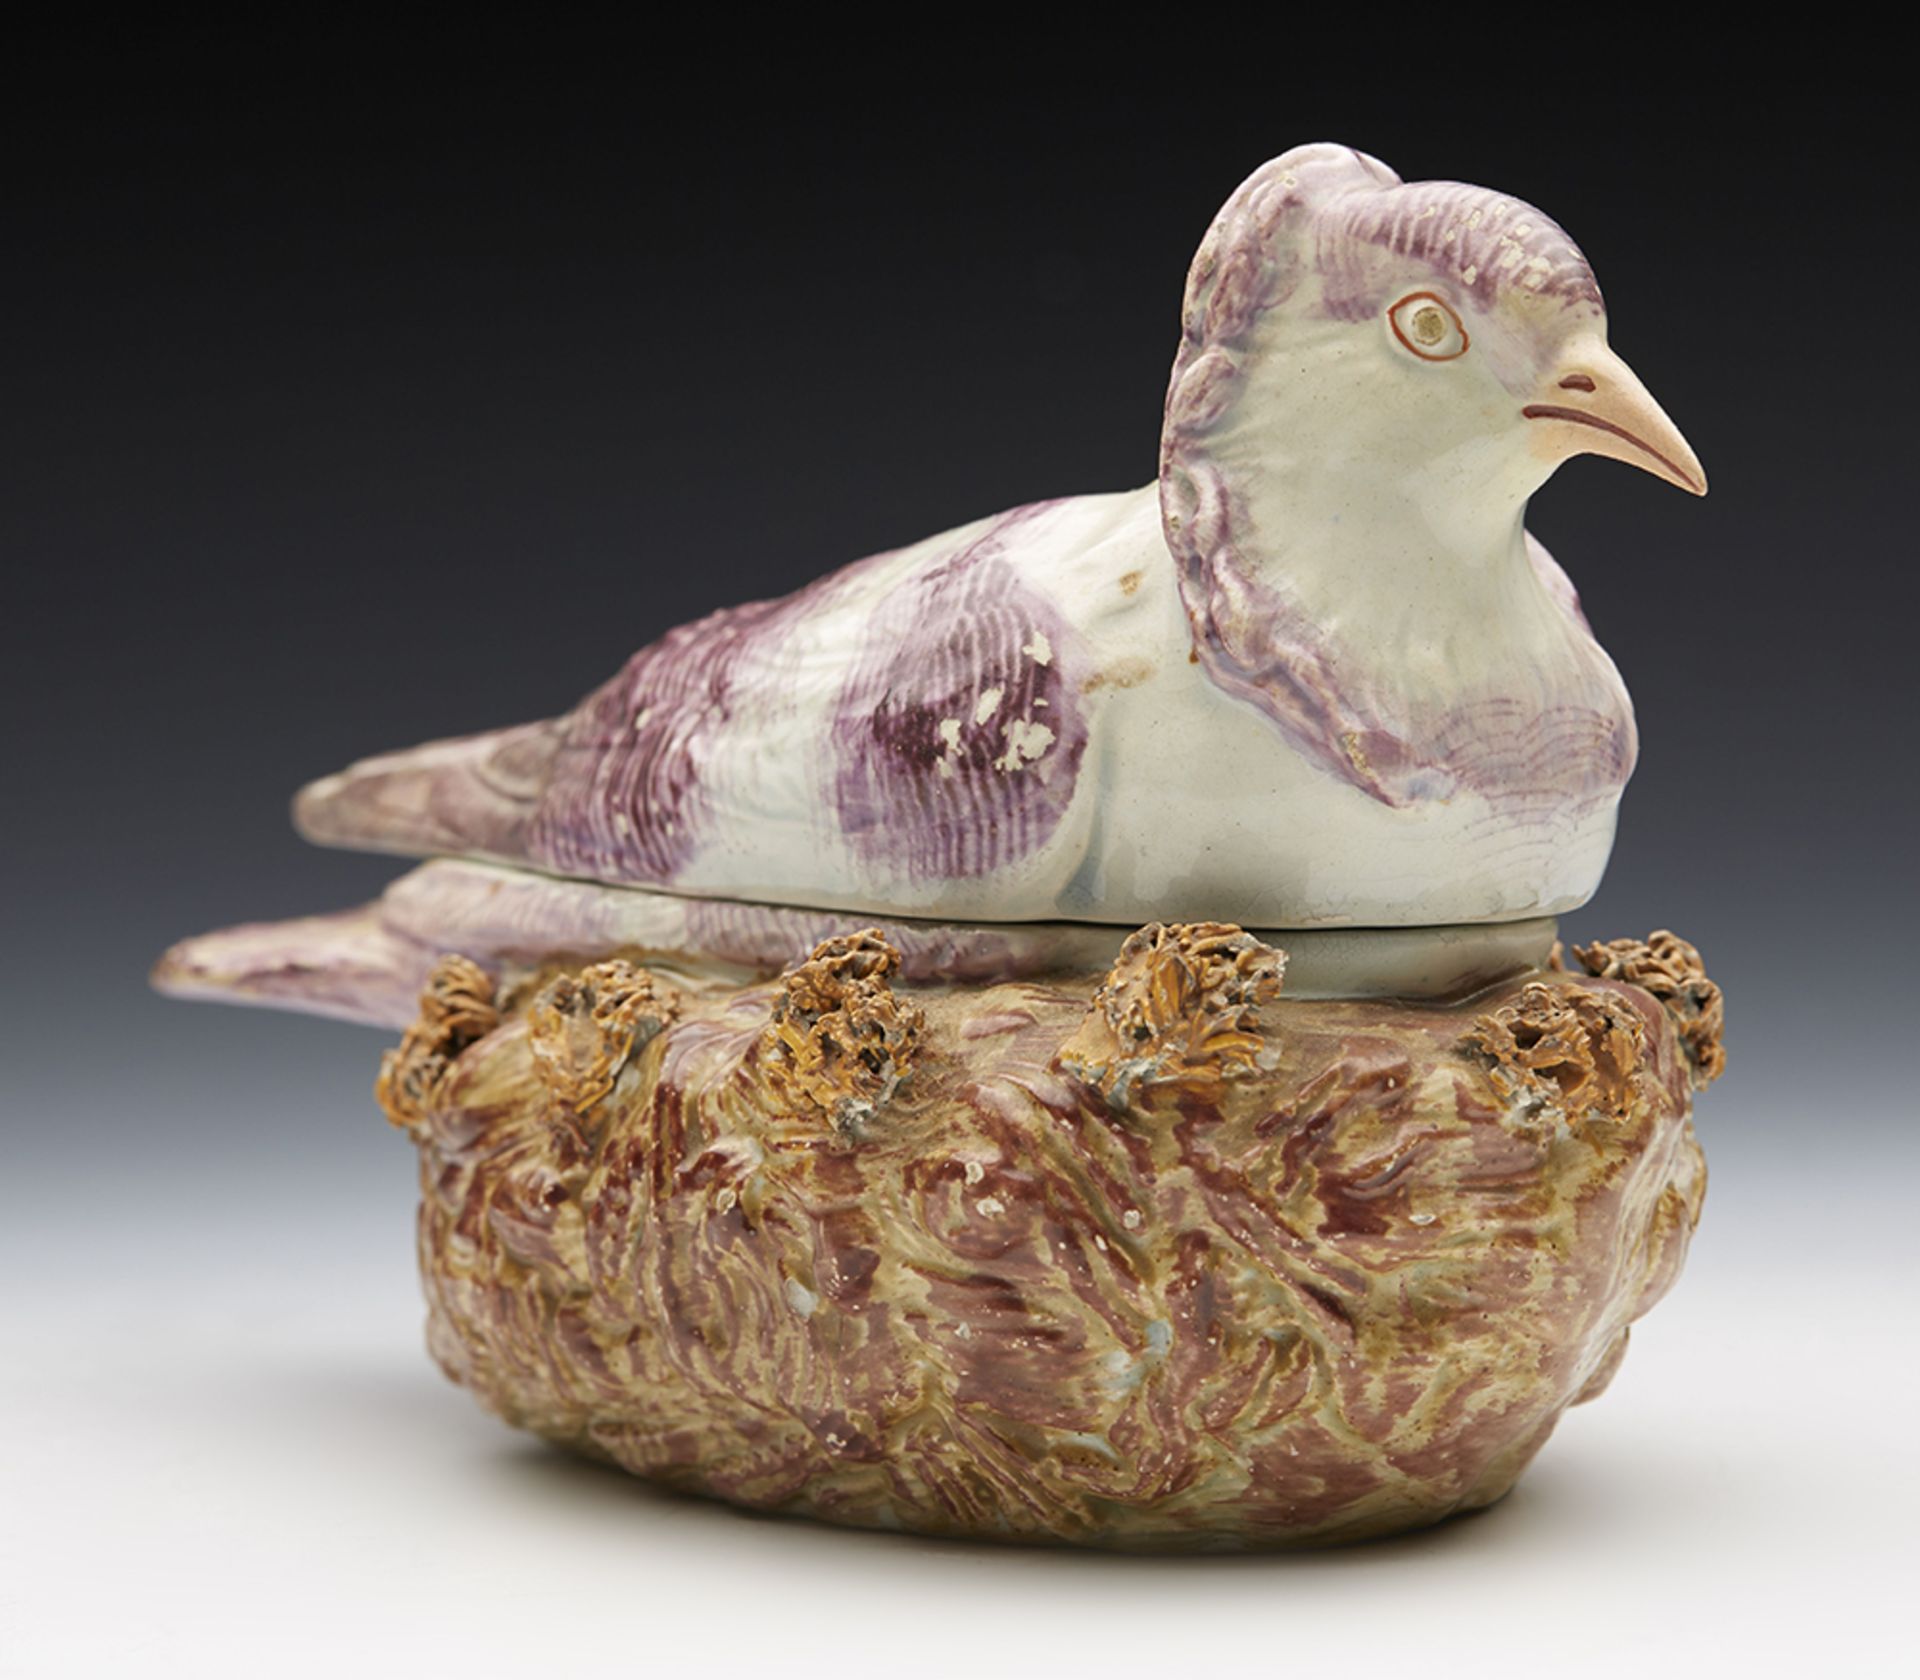 Antique Staffordshire Pearlware Pigeon Tureen Early 19Th C.